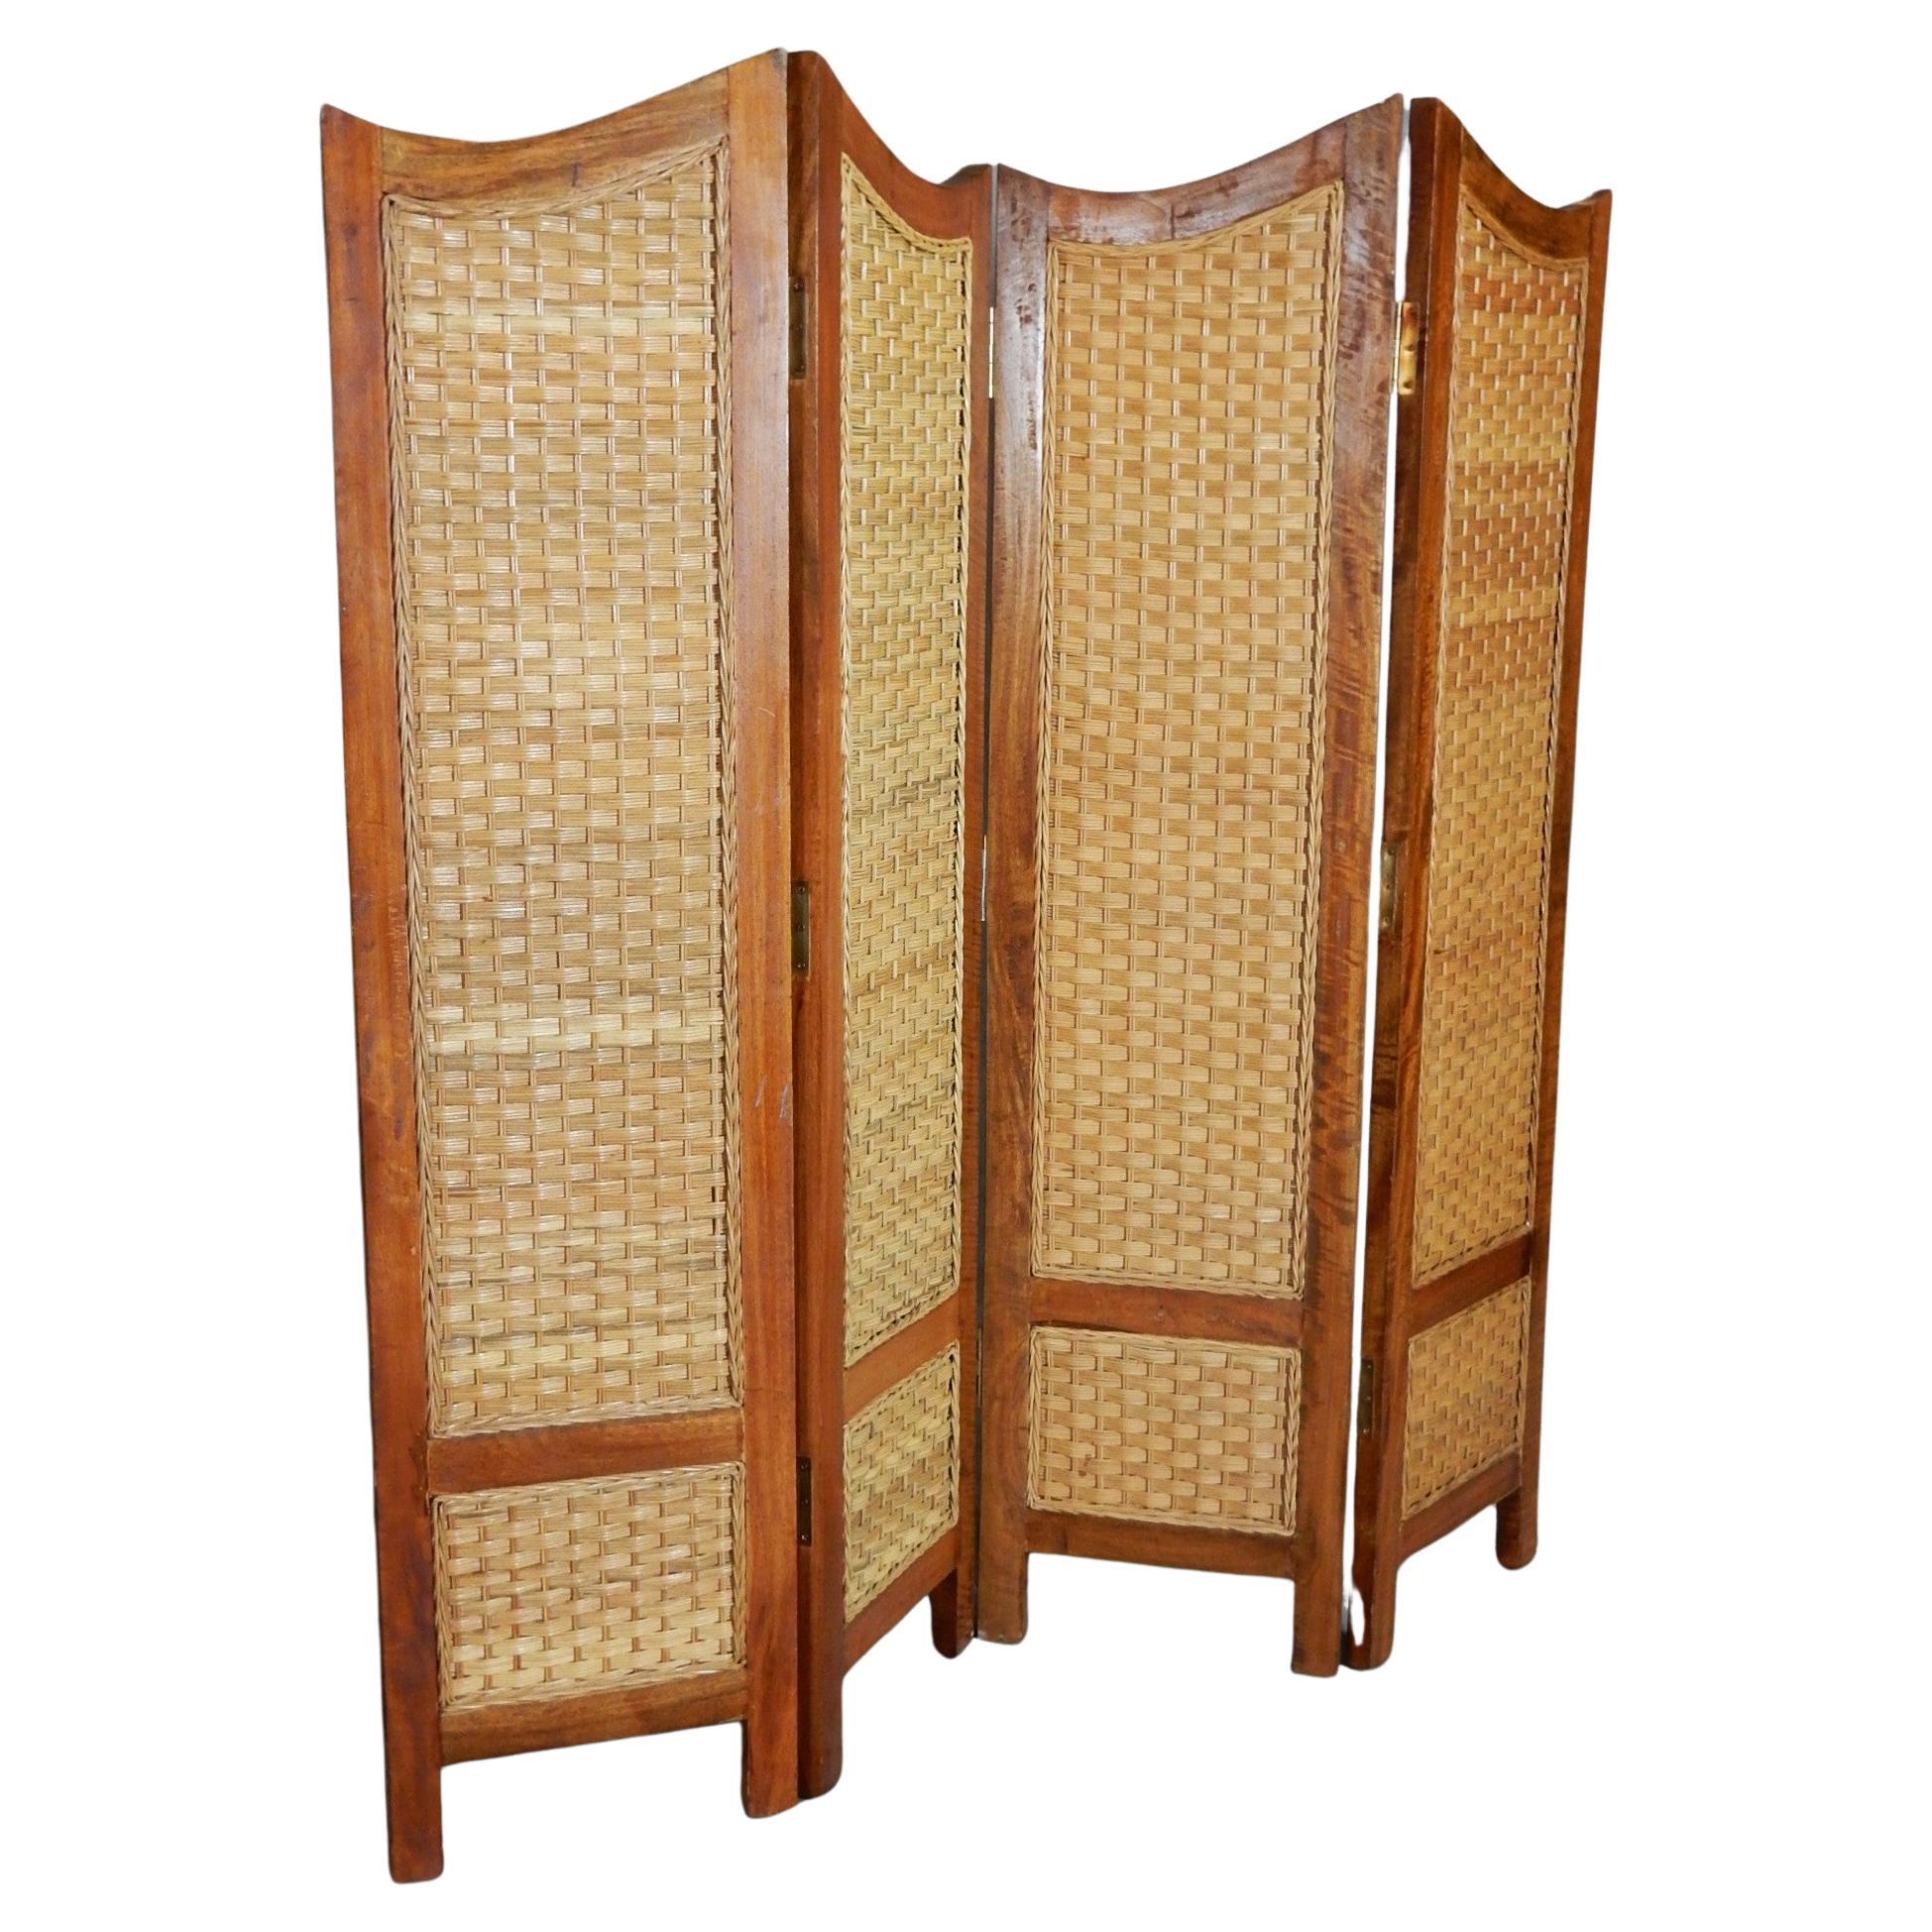 Exotic hardwood room divider, privacy screen with woven rattan cane panels.
Mexican modernism style with swooping top rails. Gorgeous grained wood with a gloss finish.
4 triple hinged panels each 16